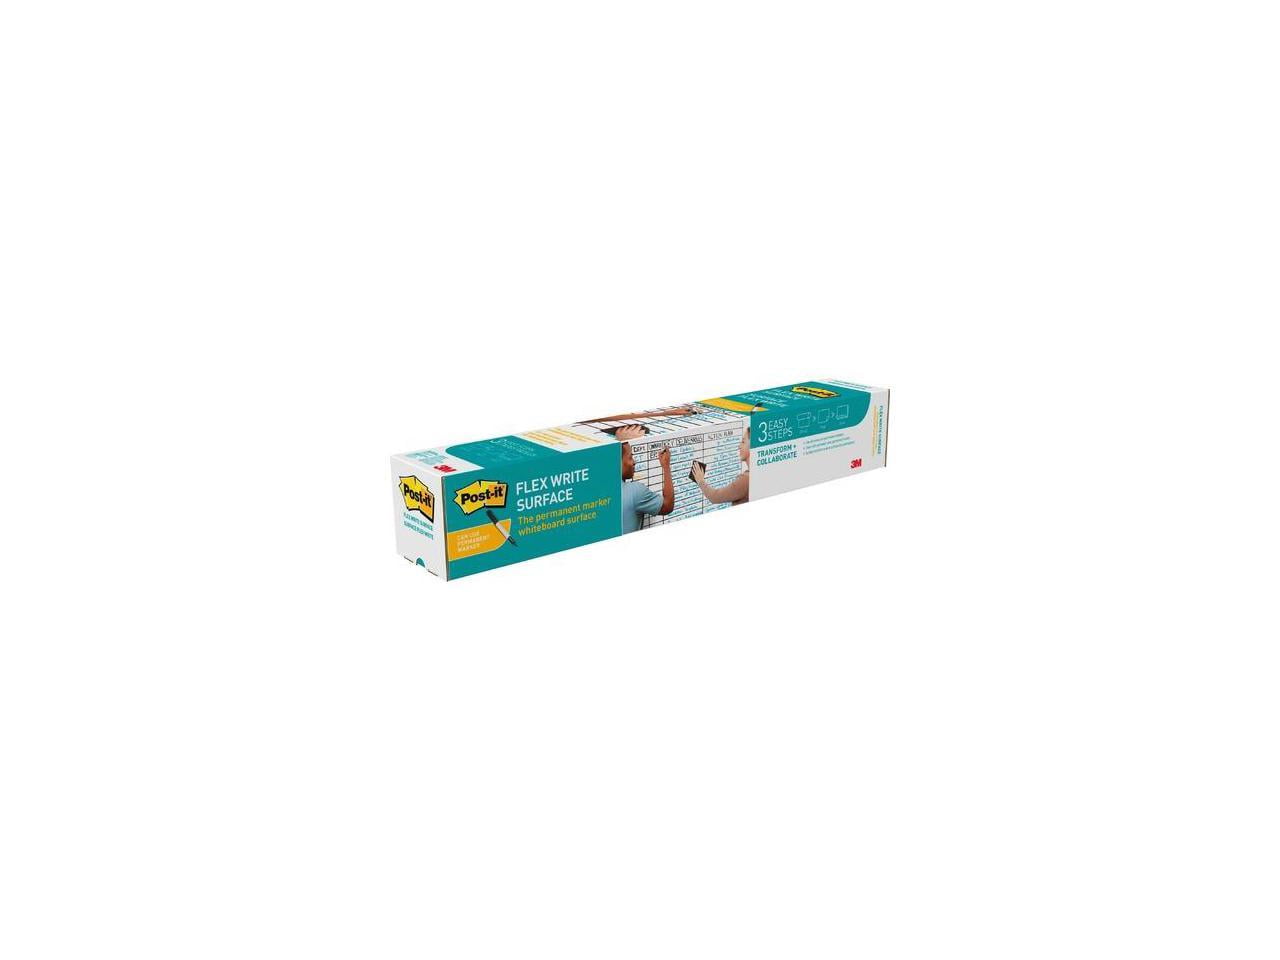 Post-it Dry Erase Surface DEF6X4, 6 x 4' Roll with Cleaning Cloth